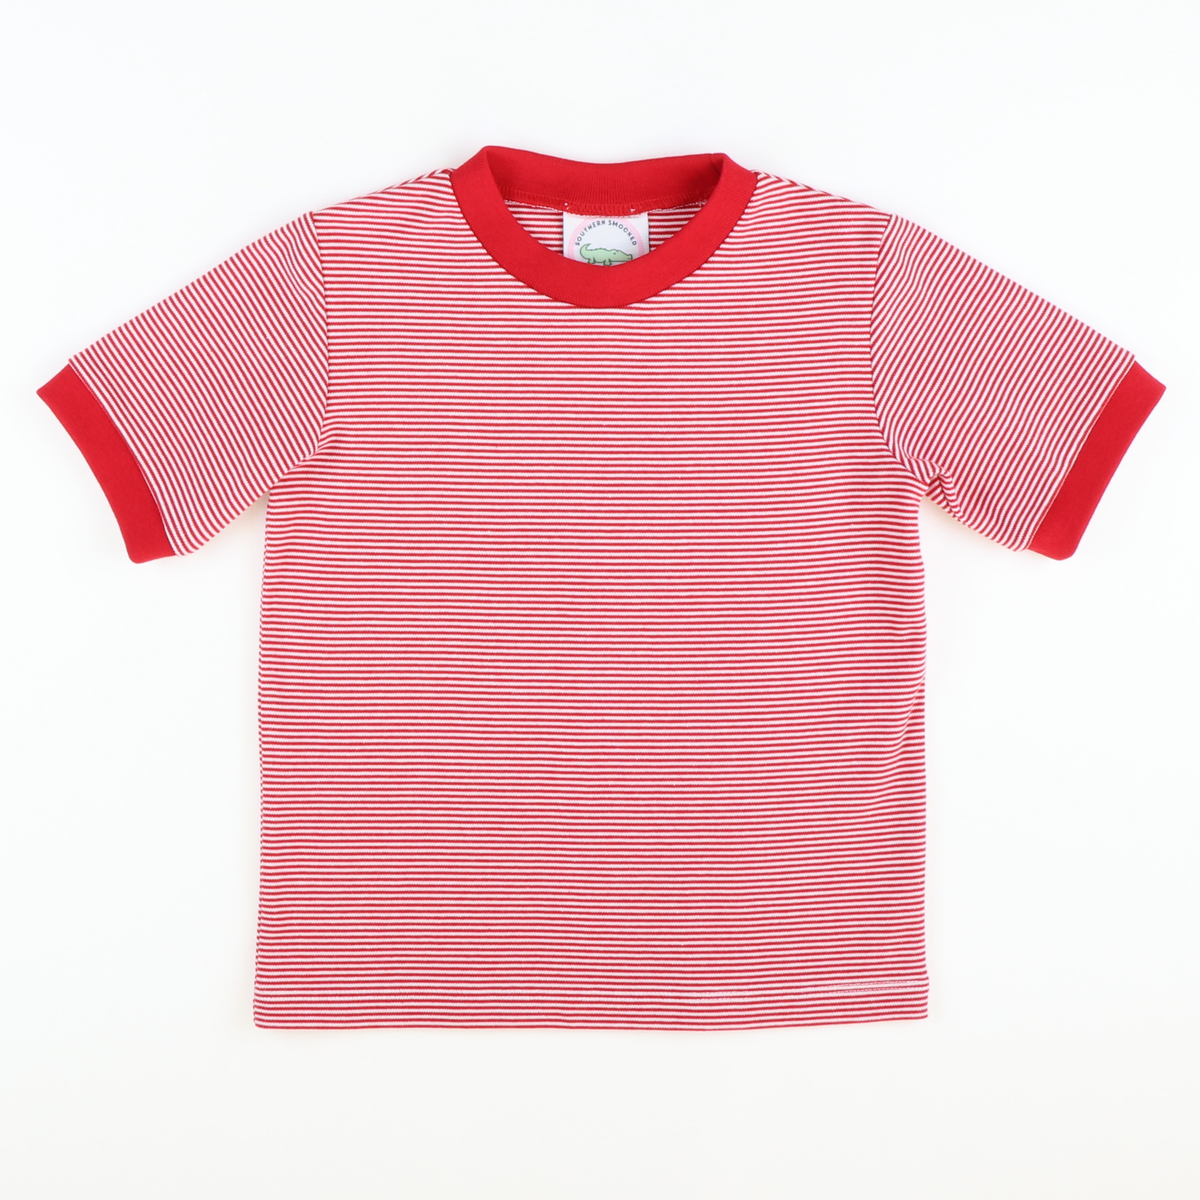 Out & About Boy Shirt - Red Micro Stripe Knit - Stellybelly